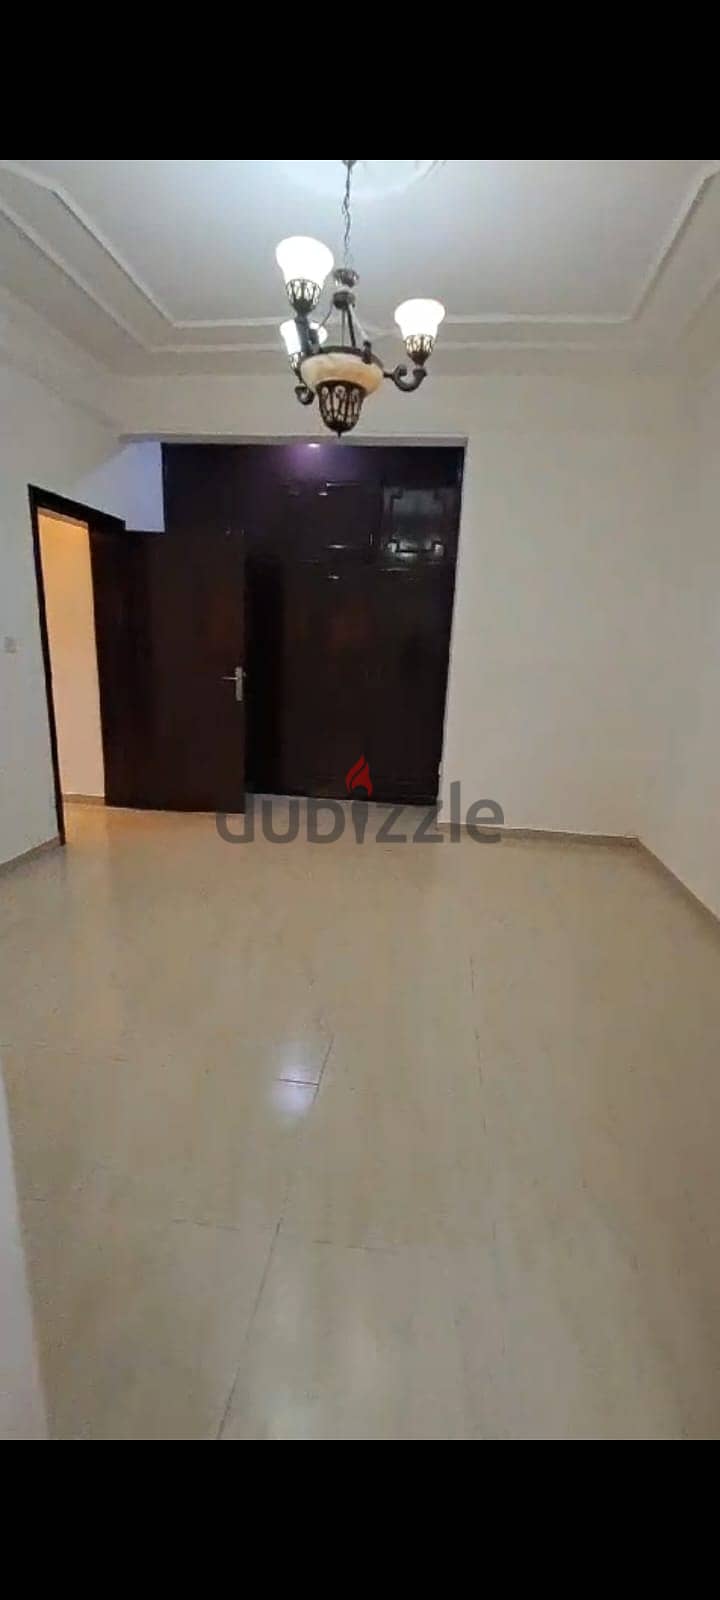 For rent flat (Ground floor apartment) in compound in Al Nasr 3bhk 8